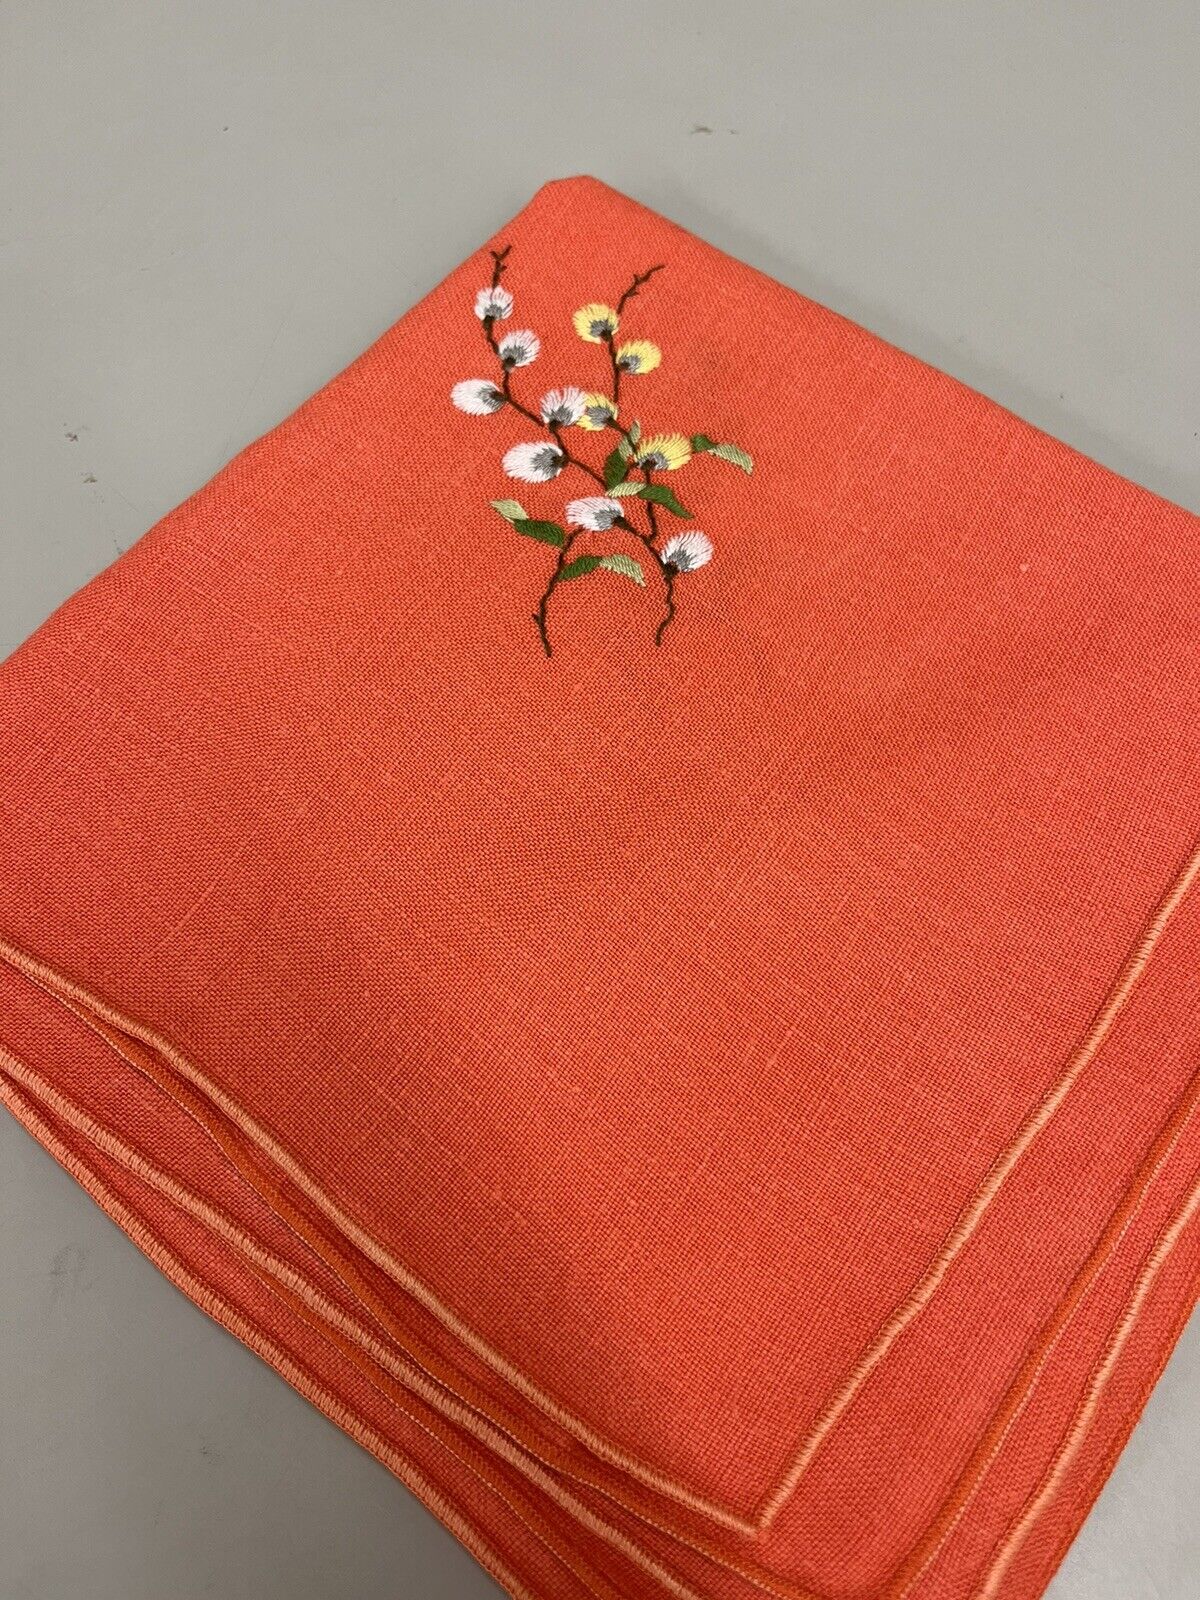 Vintage Orange Linen Tablecloth/Topper/Luncheon Cloth w pussywillow clusters 34\